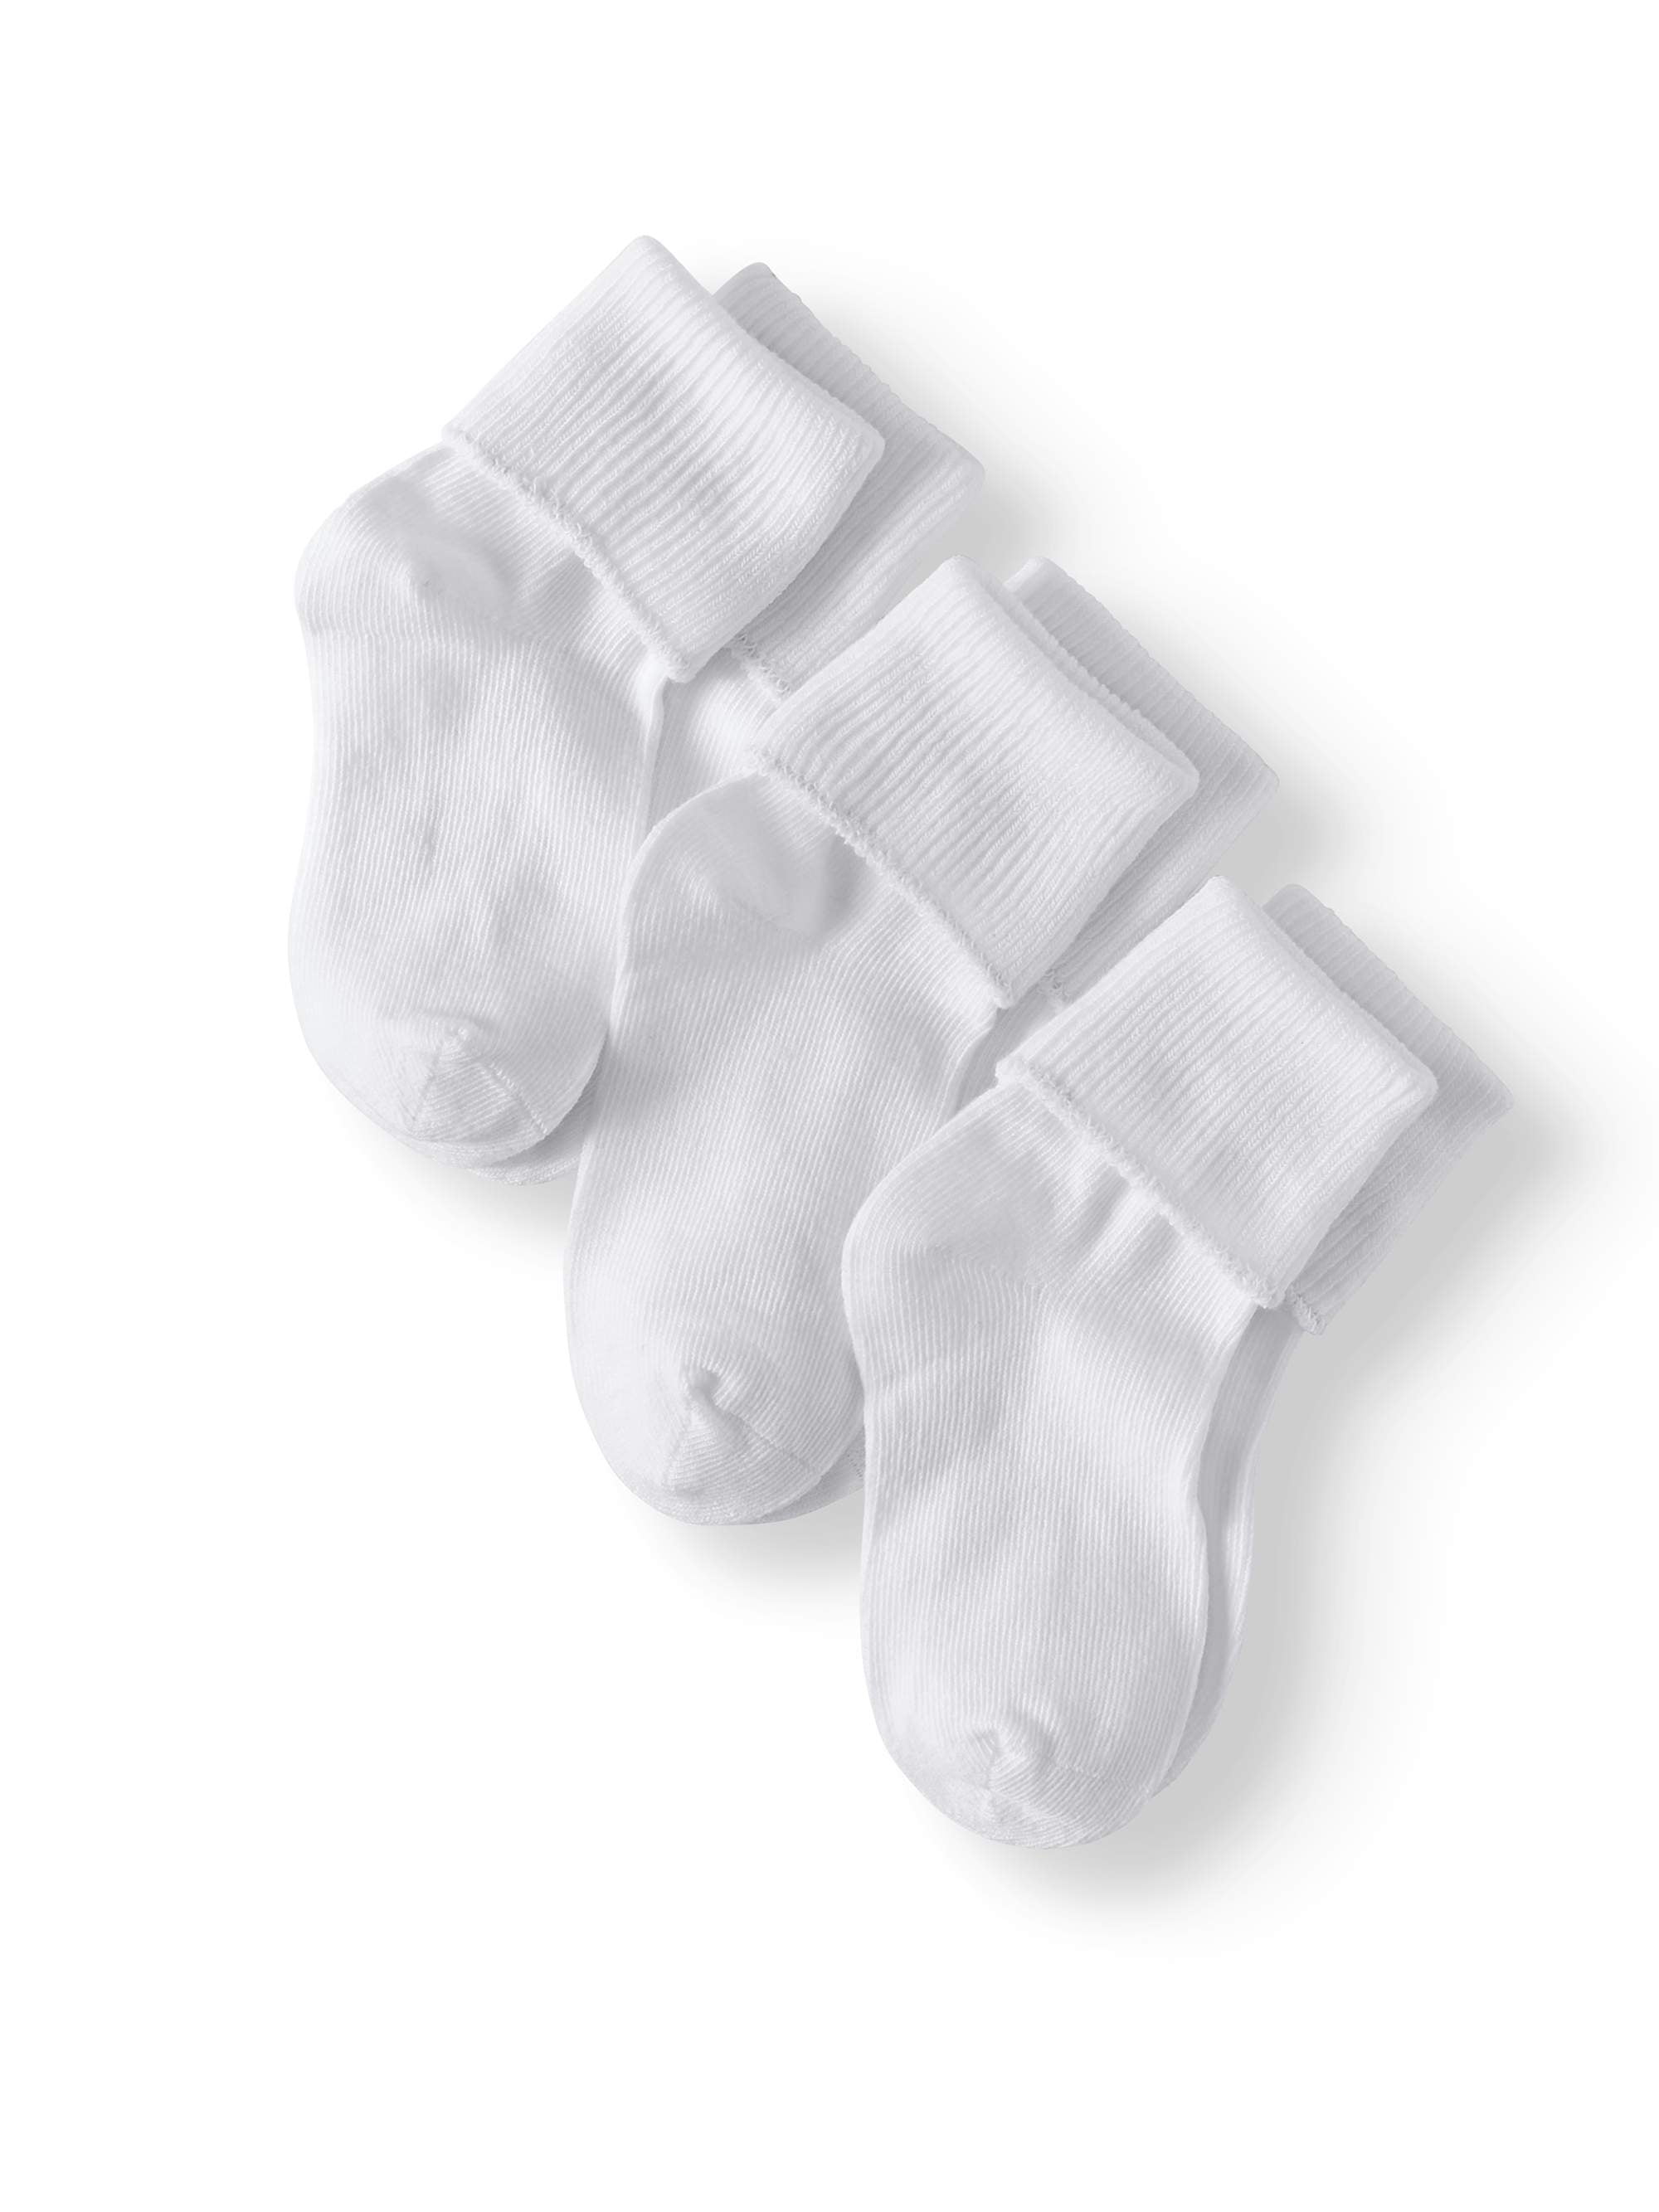 Jefferies Socks Baby Boys and Baby Girls Smooth Toe Cotton Turn Cuff ...